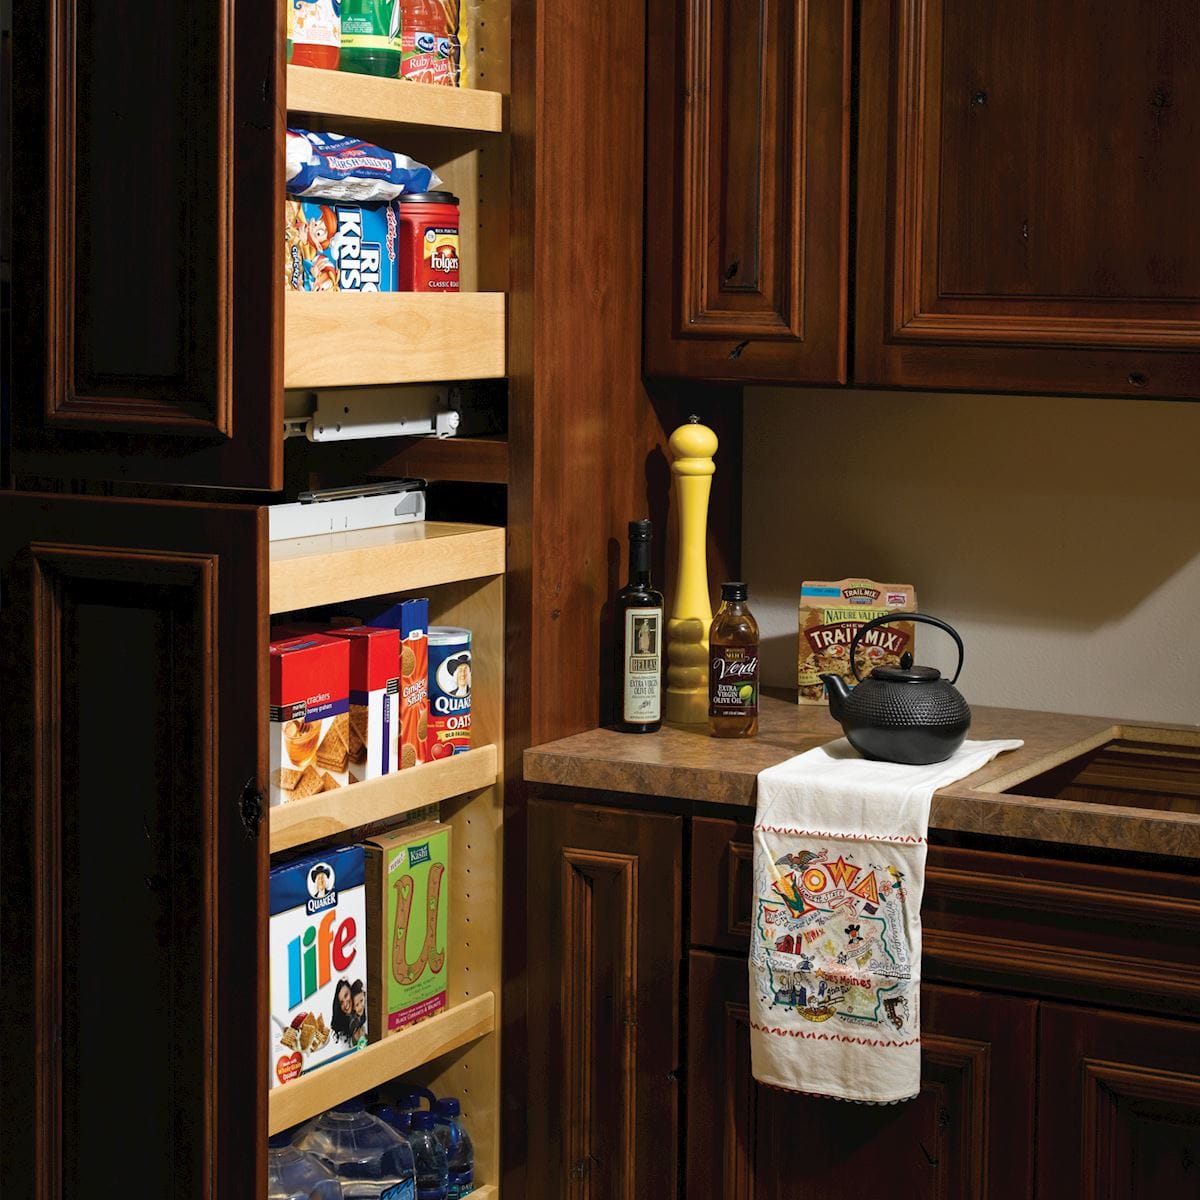 Pullout Shelves that Slide custom sliding shelving and kitchen cabinet  accessories trash recycle lazy susans roll out nearby